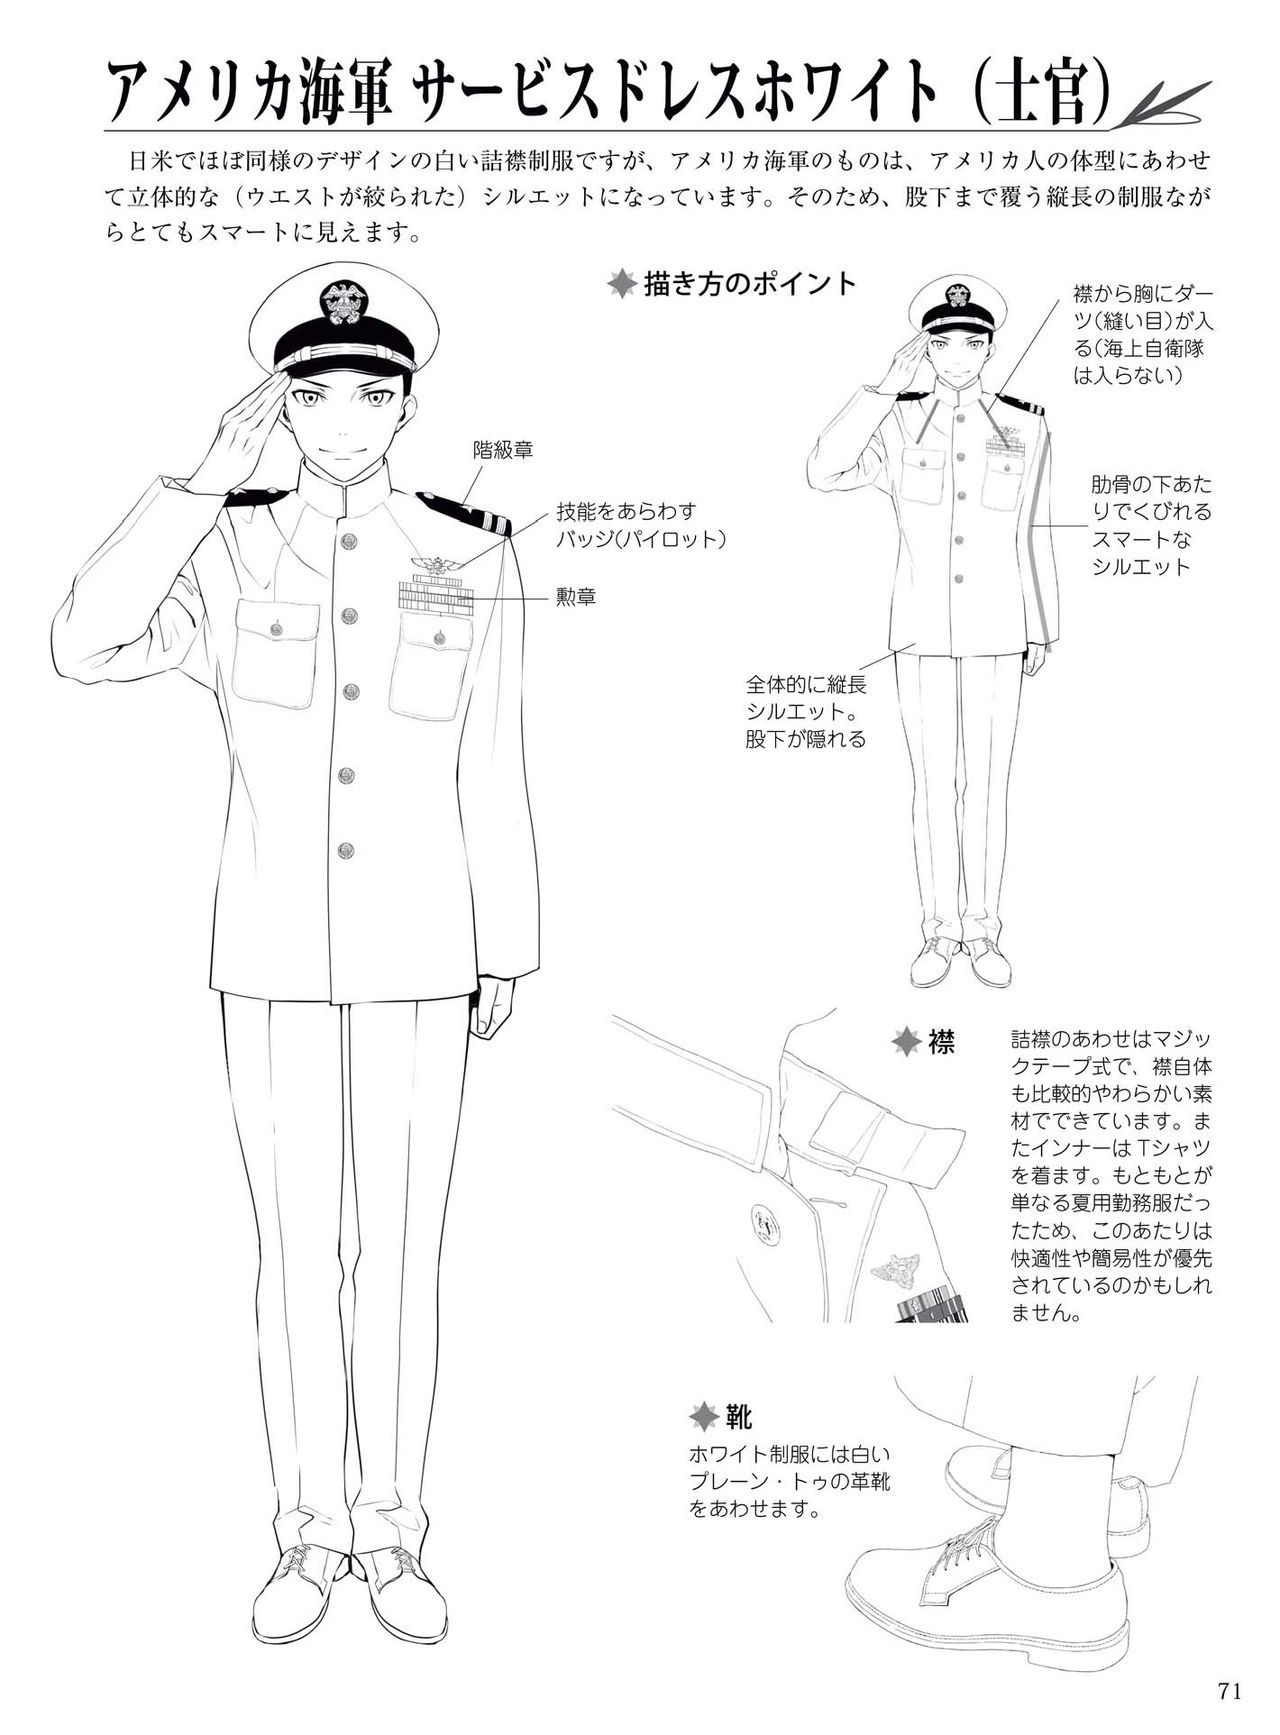 How to draw military uniforms and uniforms From Self-Defense Forces 軍服・制服の描き方 アメリカ軍・自衛隊の制服から戦闘服まで 74